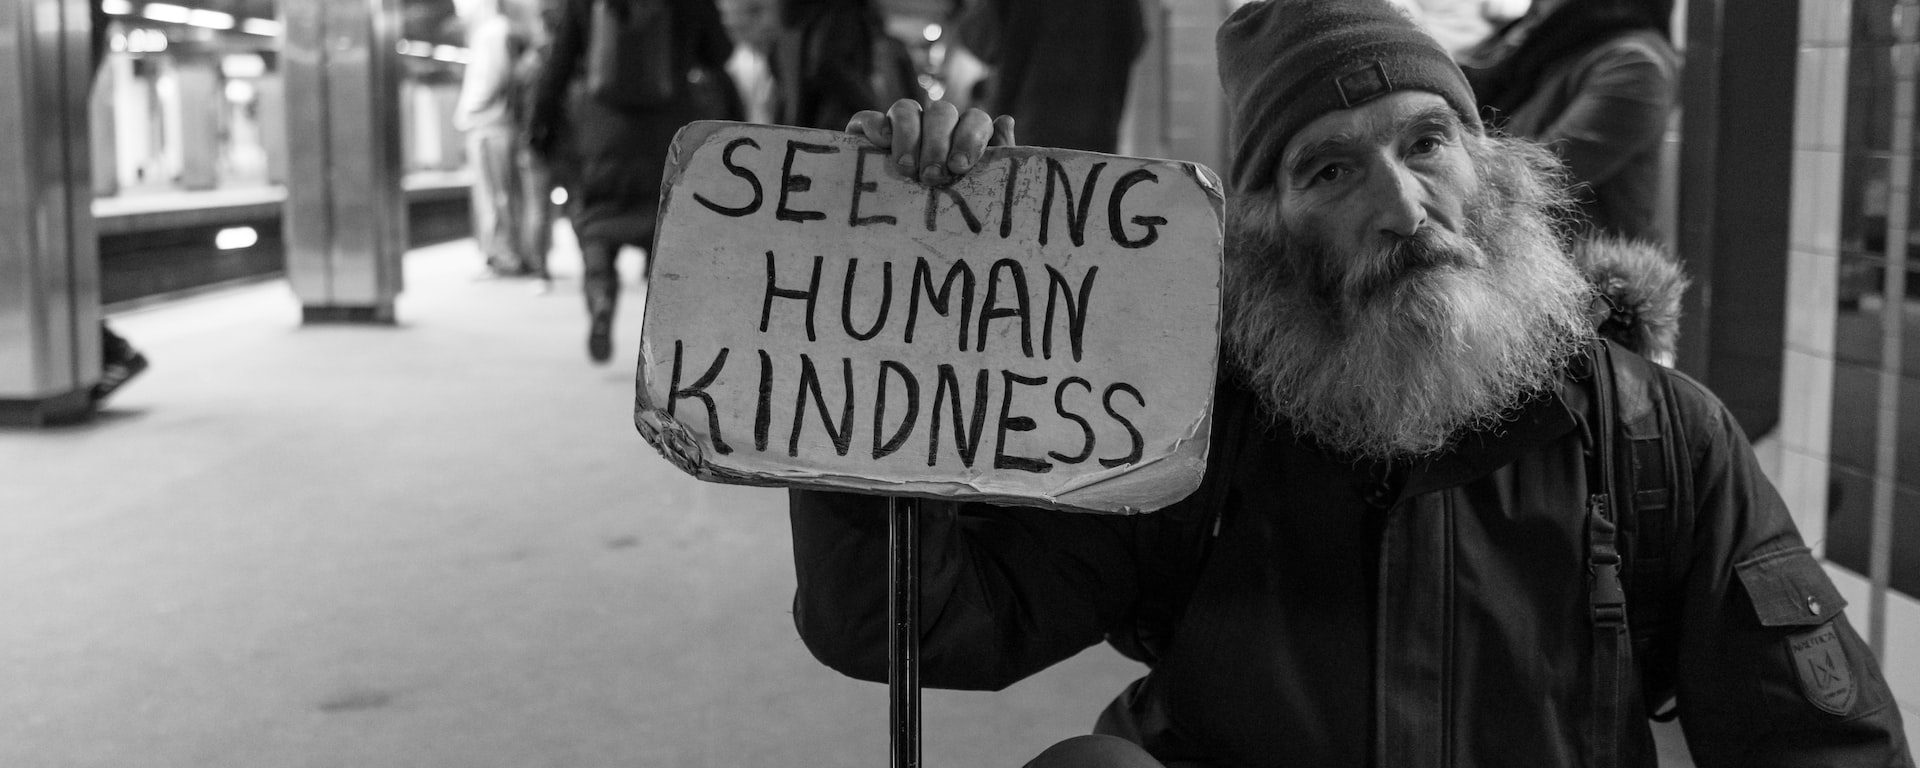 Black and white image of an older man squatting on metro platform. He has a full, grey beard and is holding a sign stating "Seeking Human Kindness". People waiting for a train in the background.